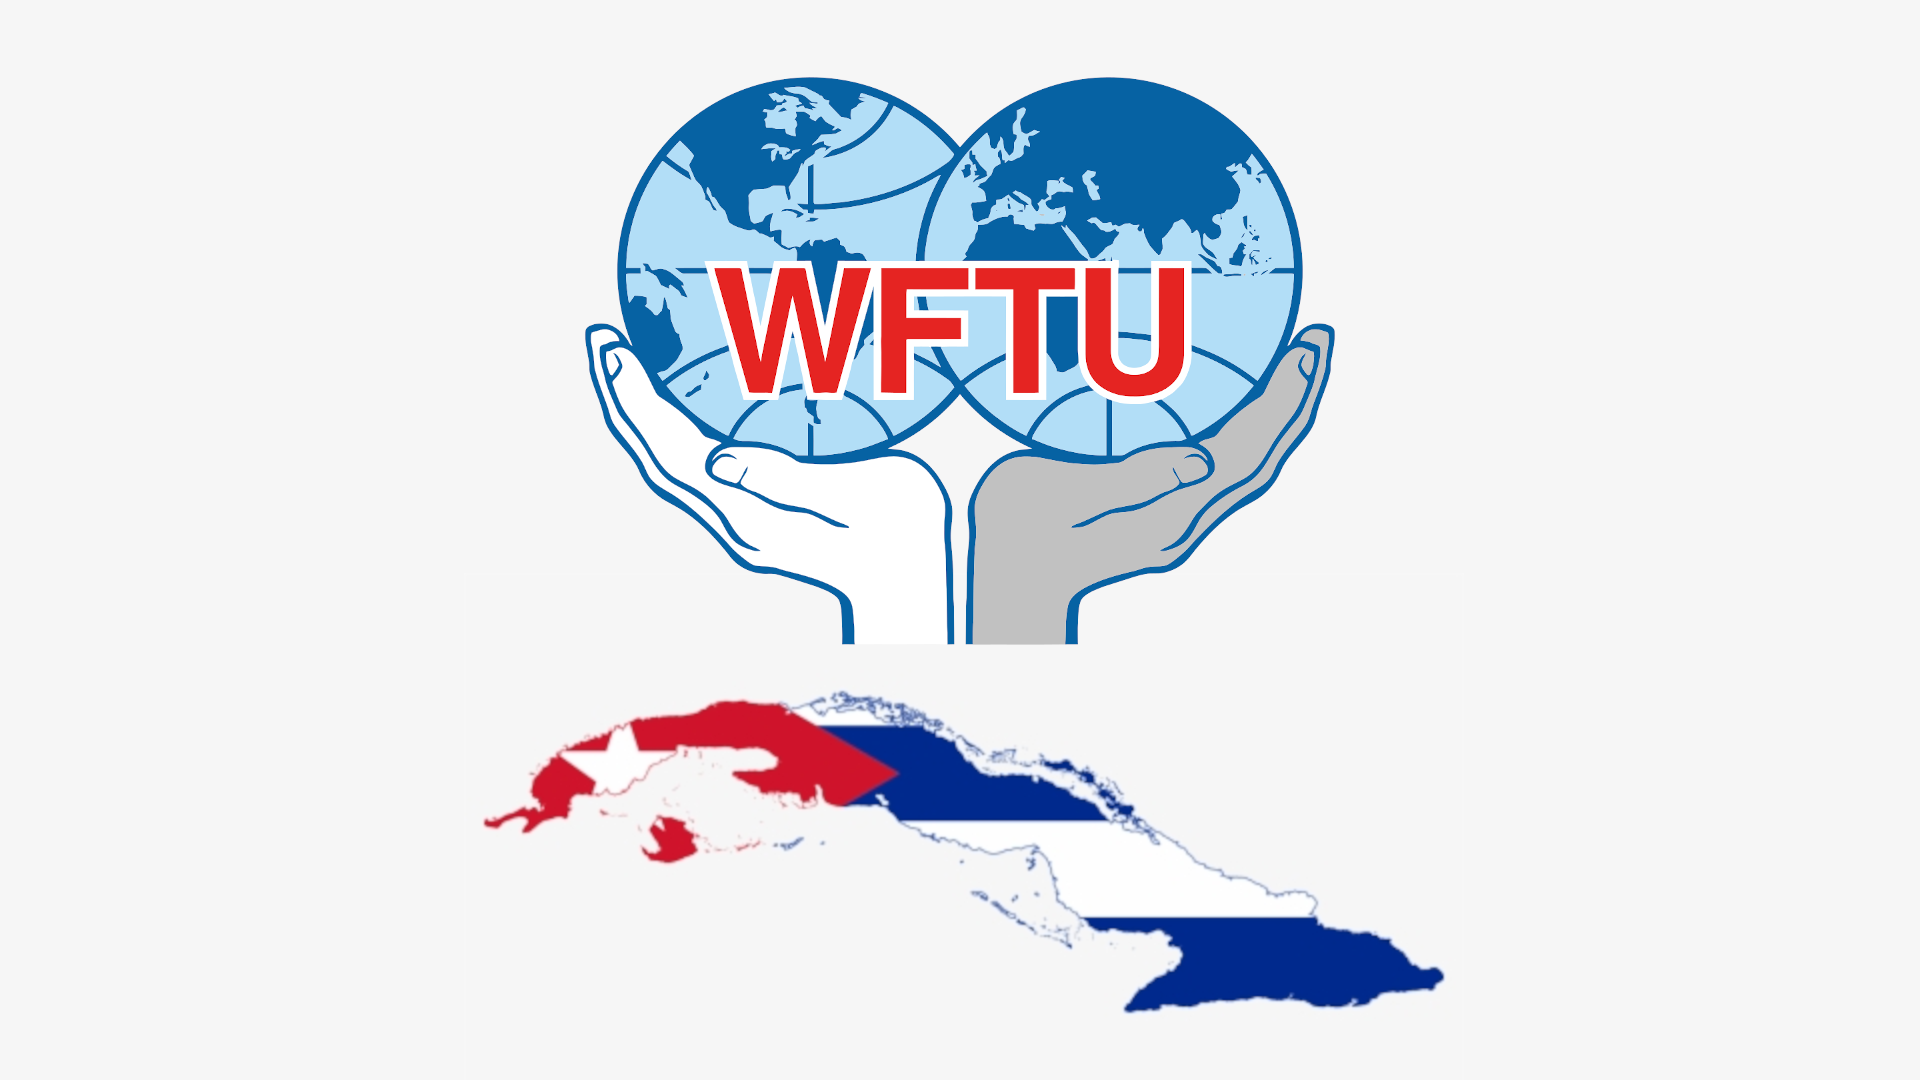 Hands off Cuba! WFTU Solidarity Campaign with the People of Cuba!